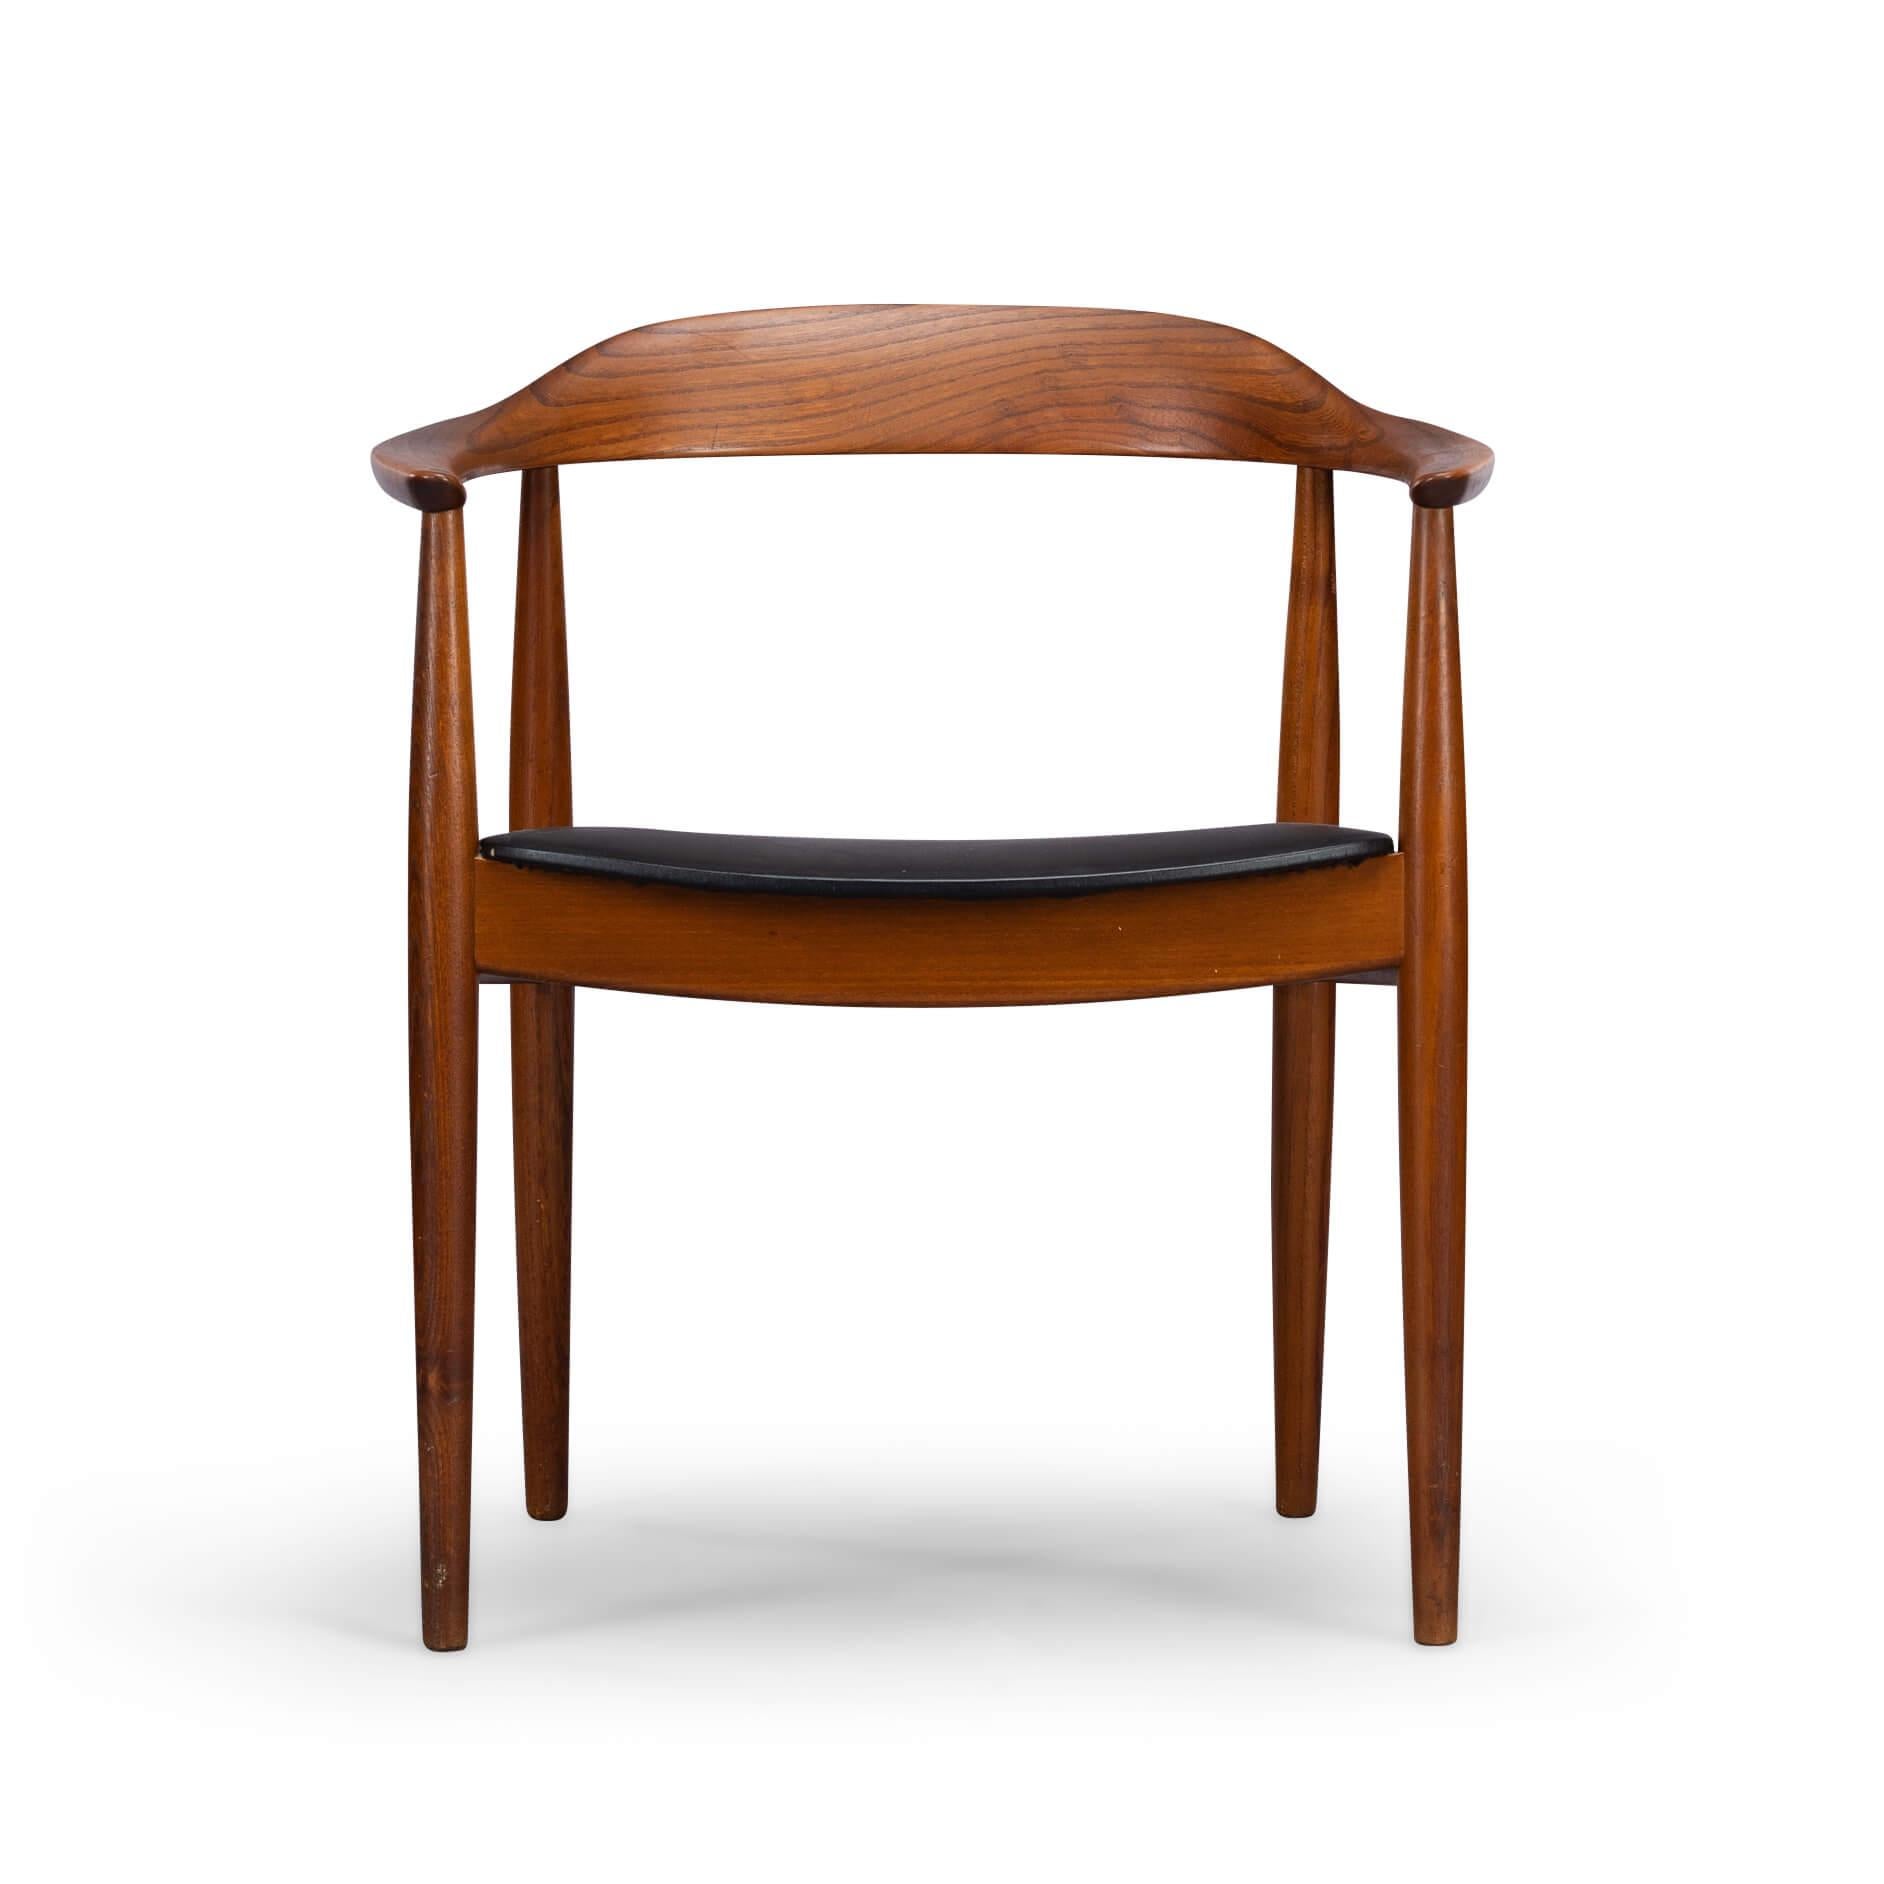 Spotted in the blink of an eye, this is an Eilersen! Design is often attributed to Illum Wikkelsø but it was Arne Wahl Iversen who designed this desk chair, regardless it is instantaneously recognisable as an Niels Eilersen. Producer Eilersen was